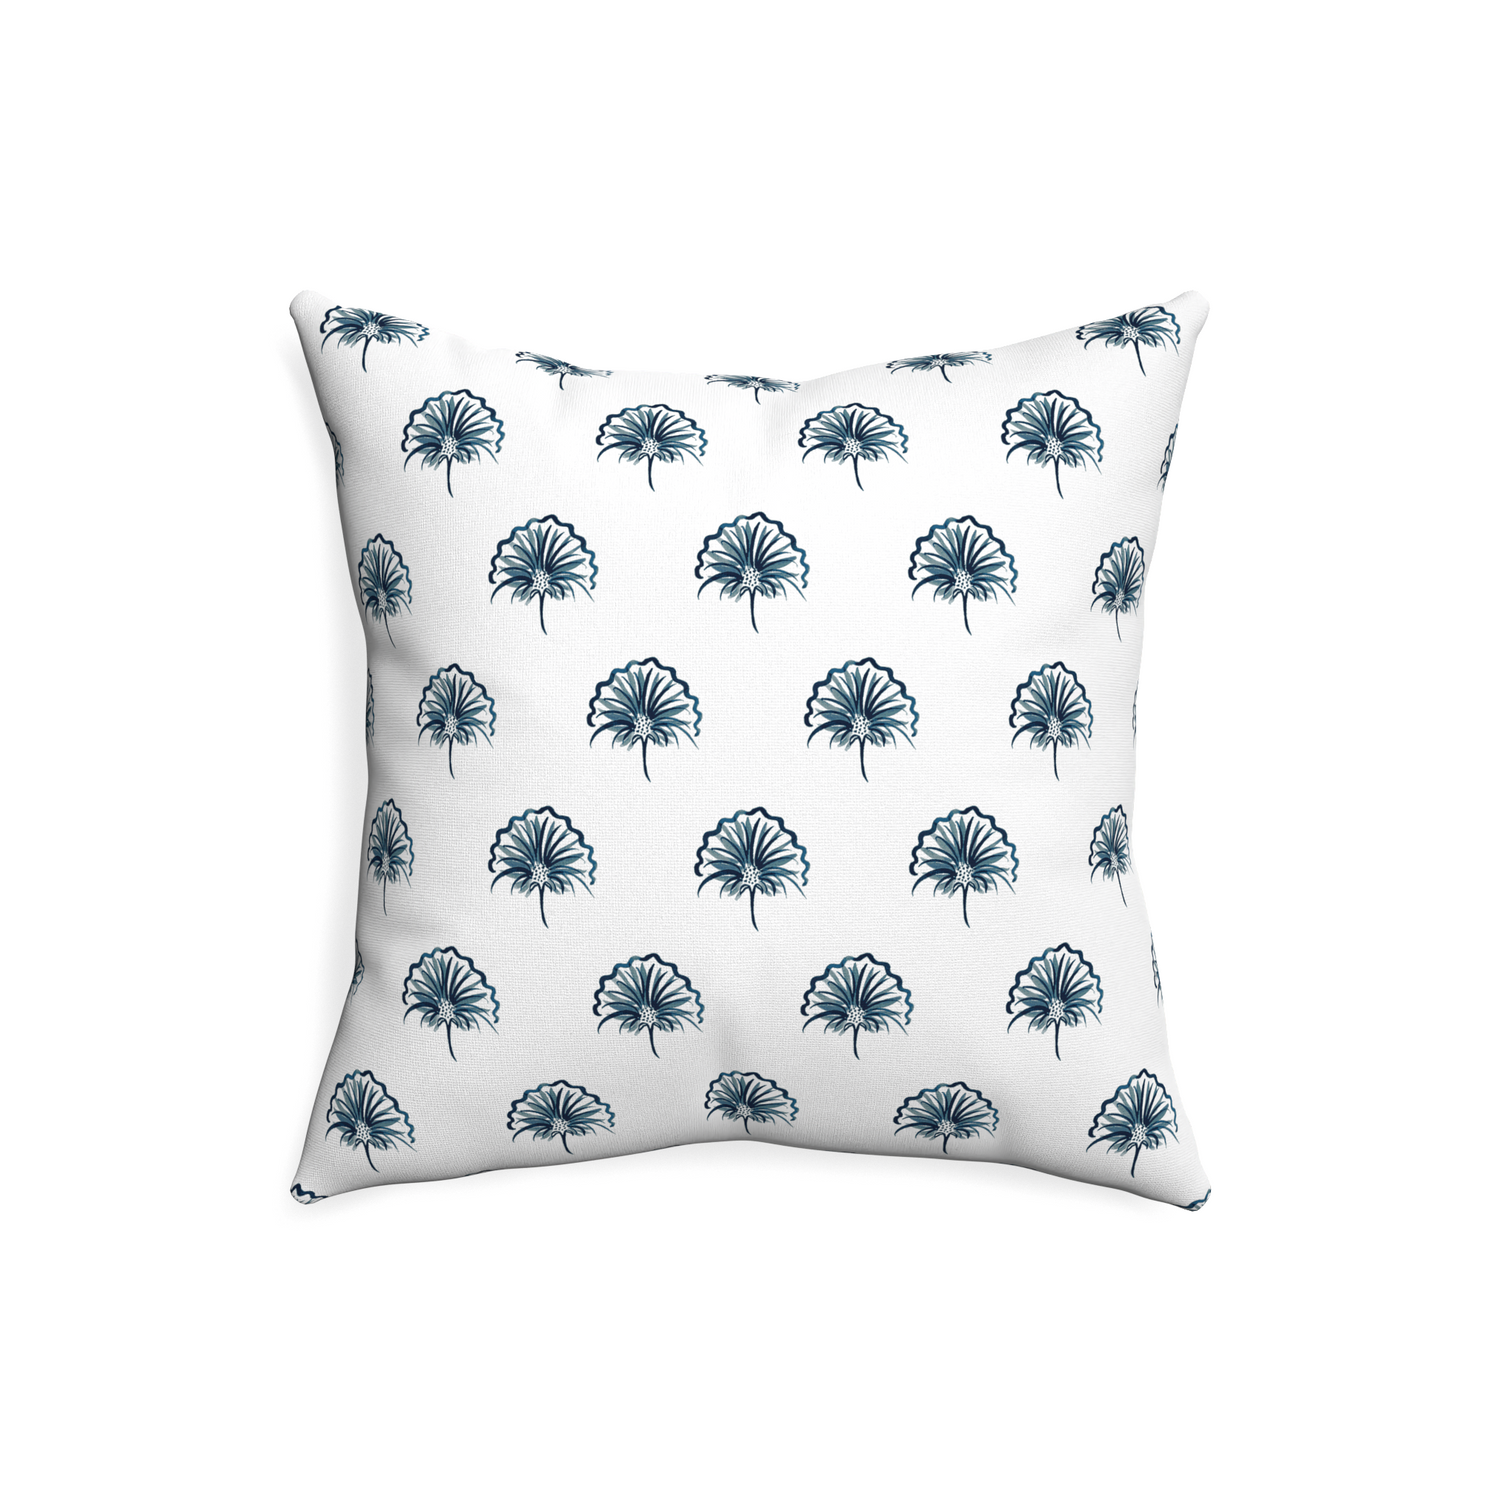 20-square penelope midnight custom floral navypillow with none on white background